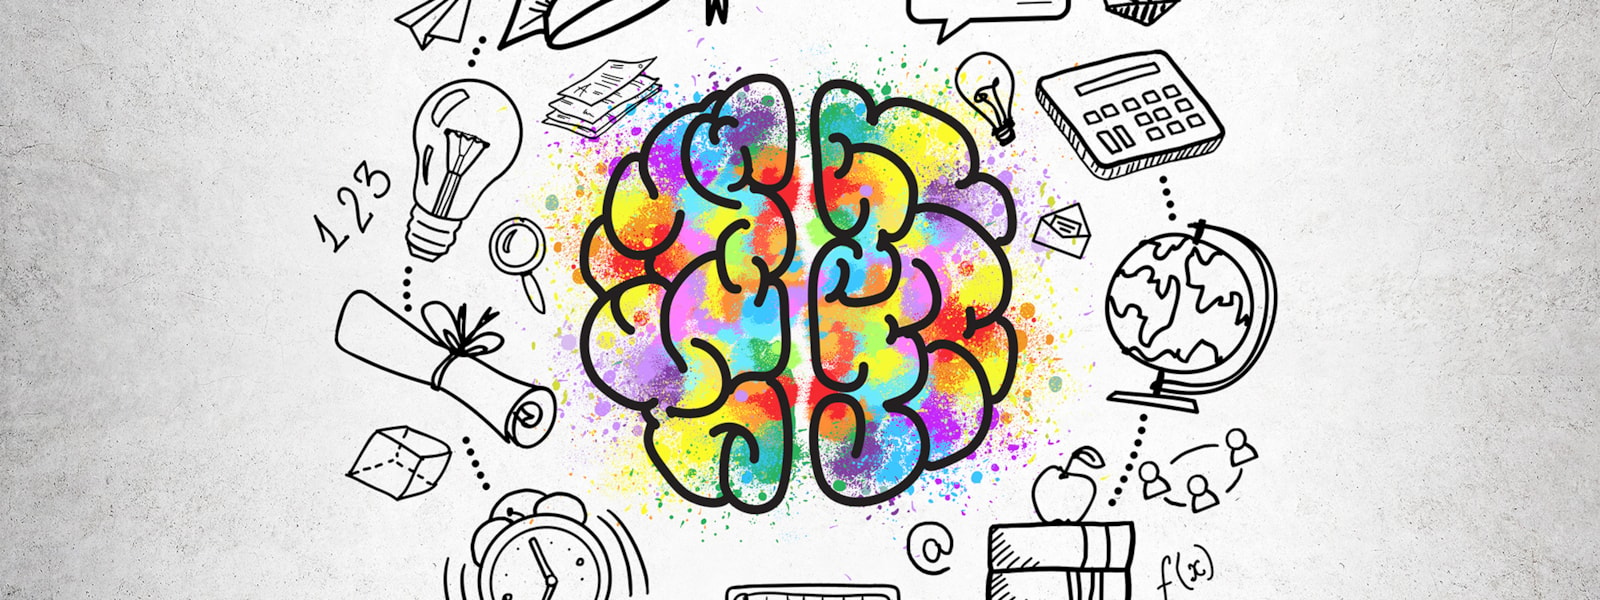 A Colorful Brain that surrounded by ideas.